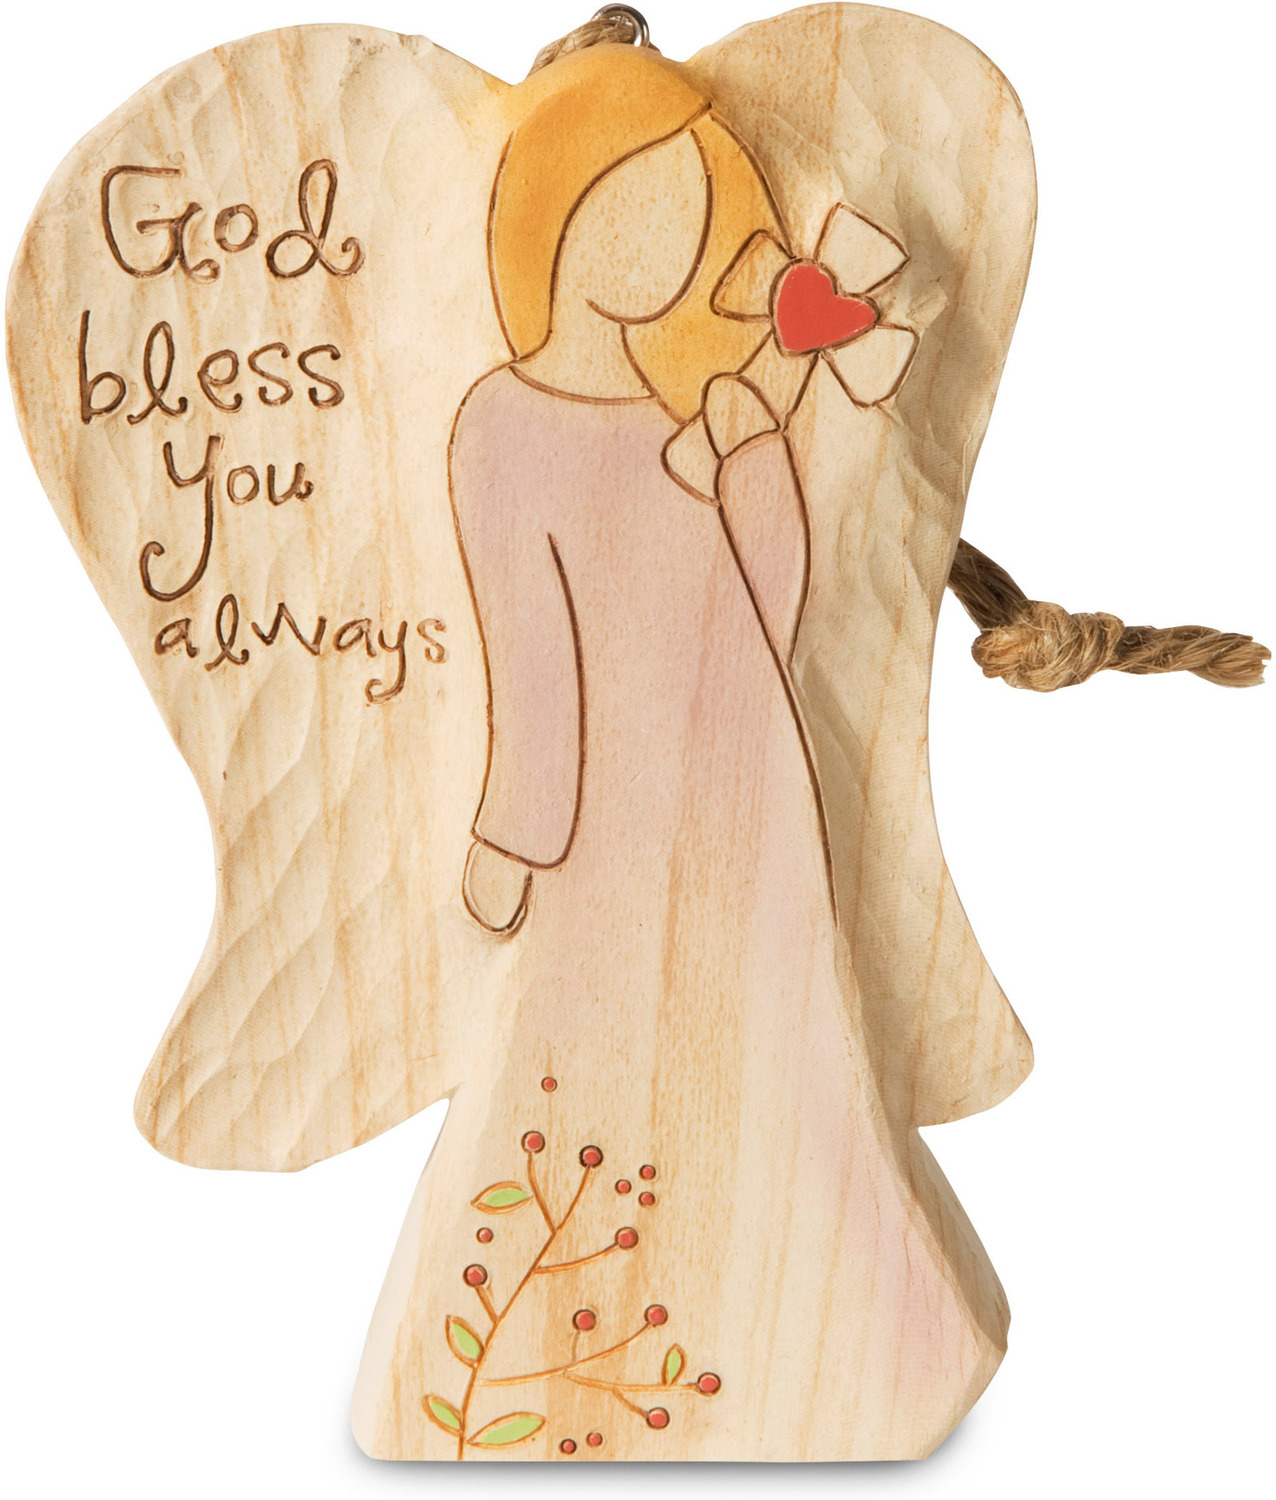 God Bless You by Heavenly Woods - God Bless You - 4.5" Angel Ornament Holding Cross